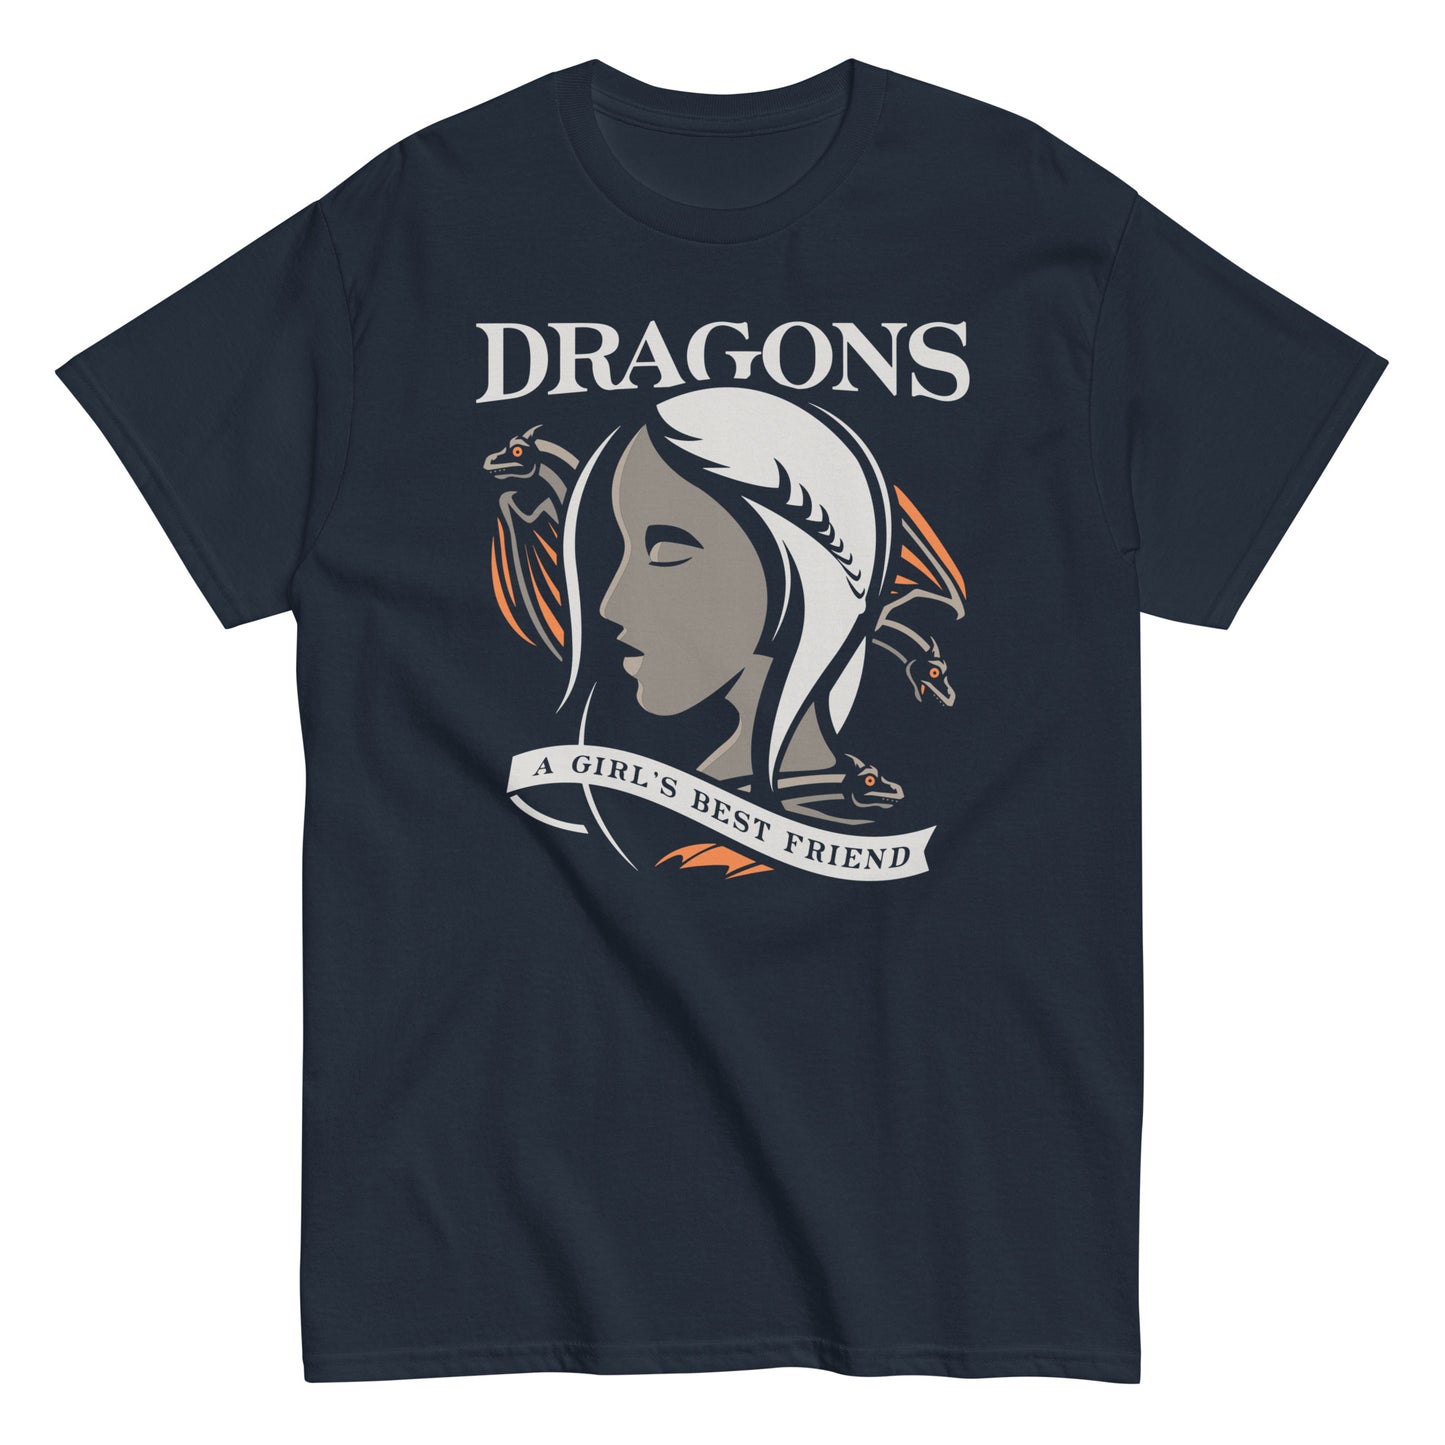 Dragons Are A Girl's Best Friend Men's Classic Tee